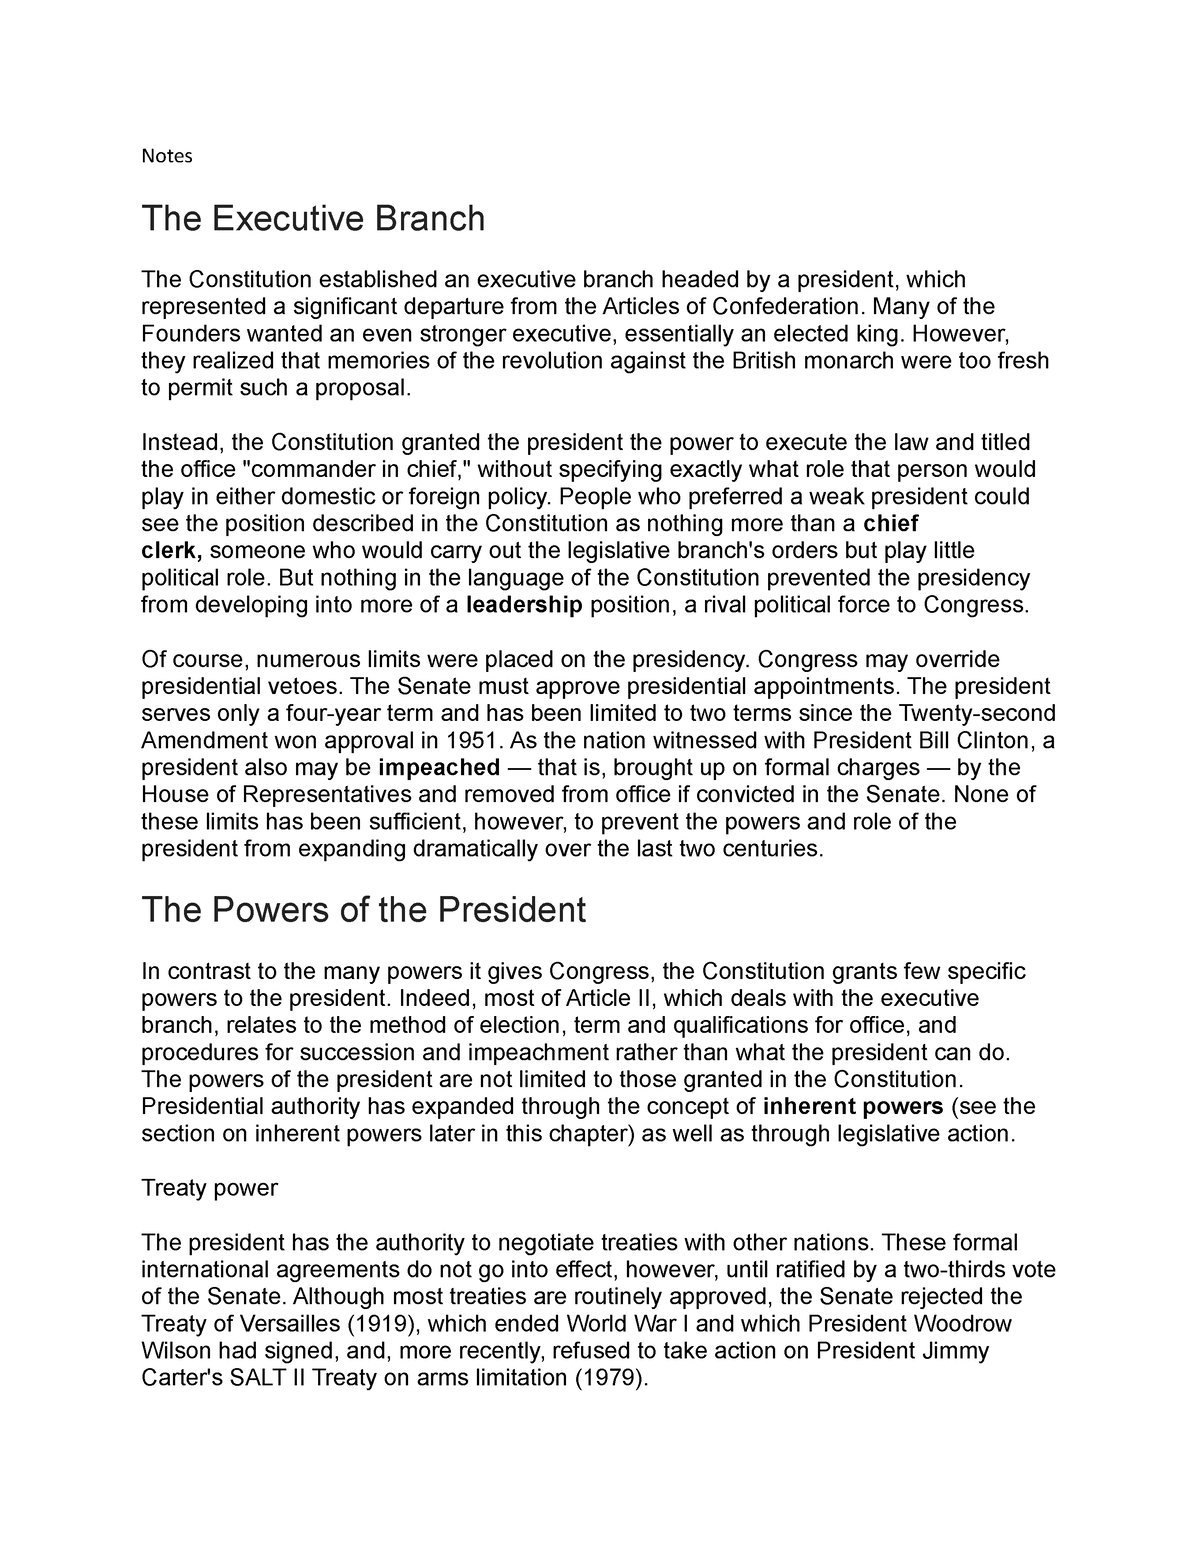 history of the executive branch essay